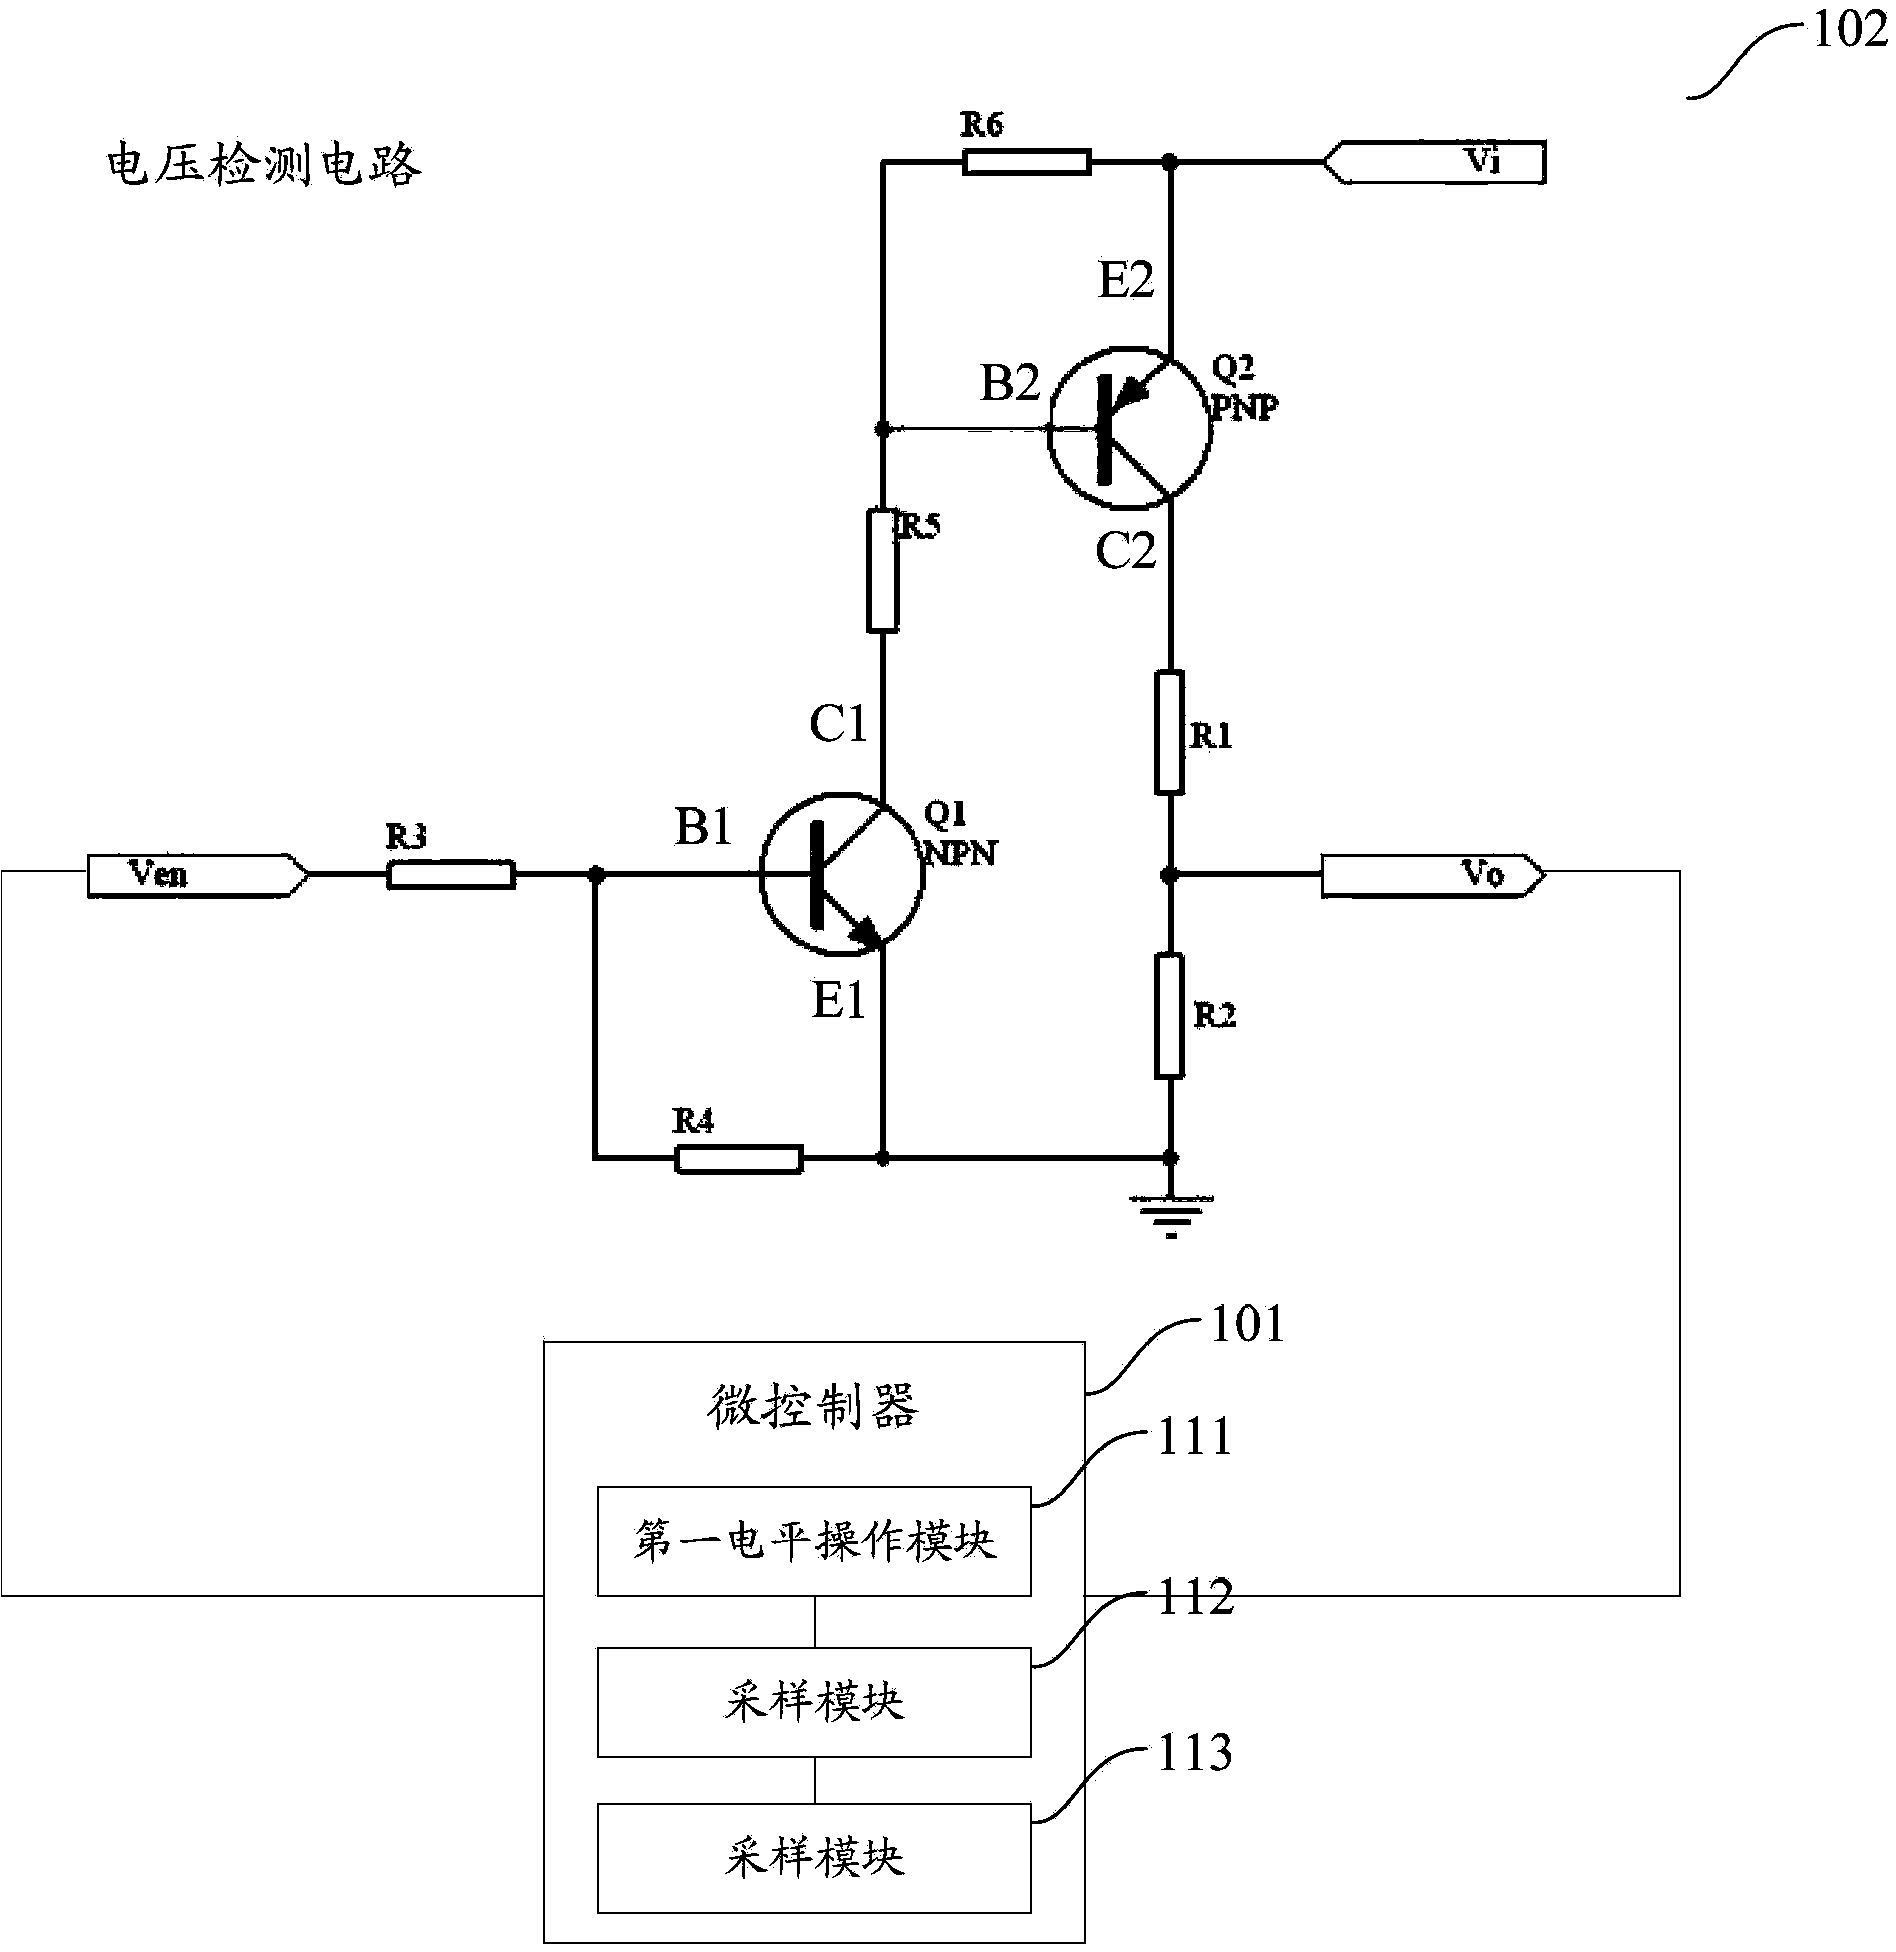 Voltage detecting circuit in vehicle-mounted equipment and vehicle-mounted equipment